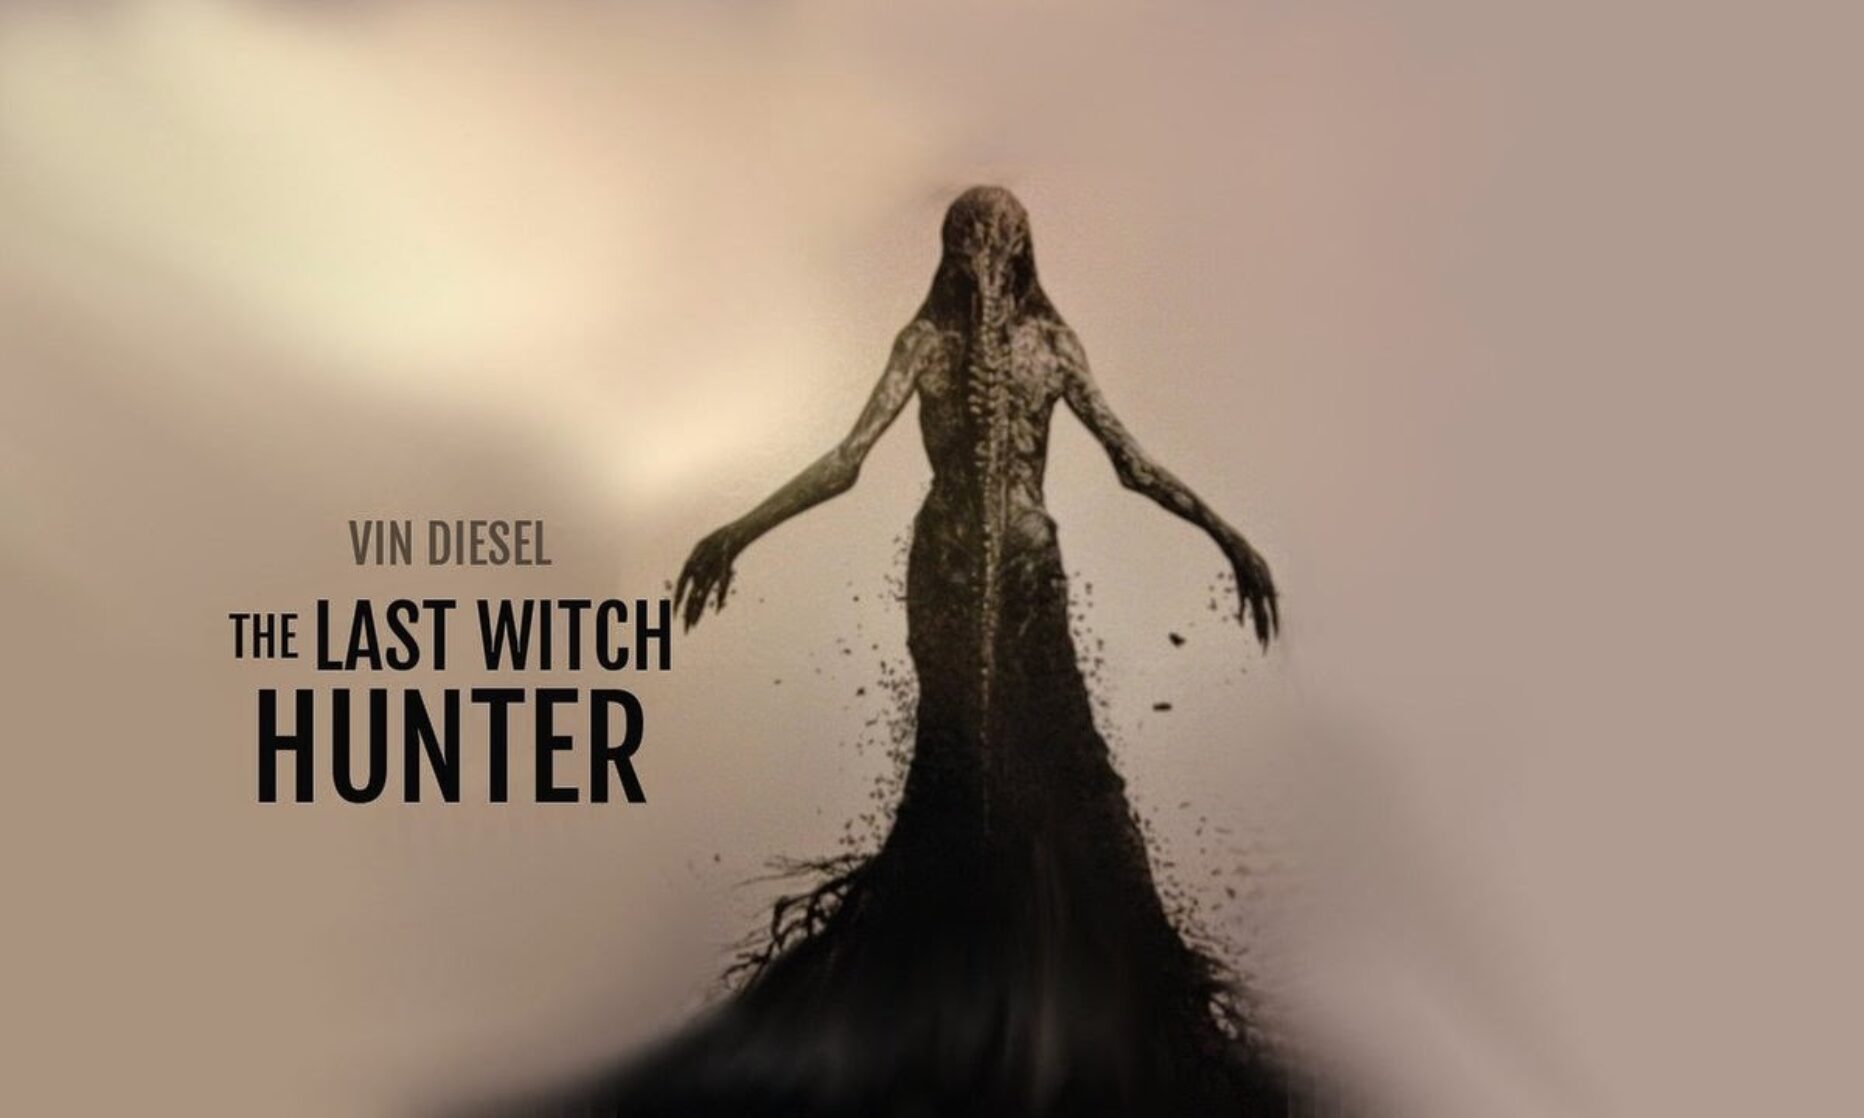 Tuesday Trailer #02: The Last Witch Hunter